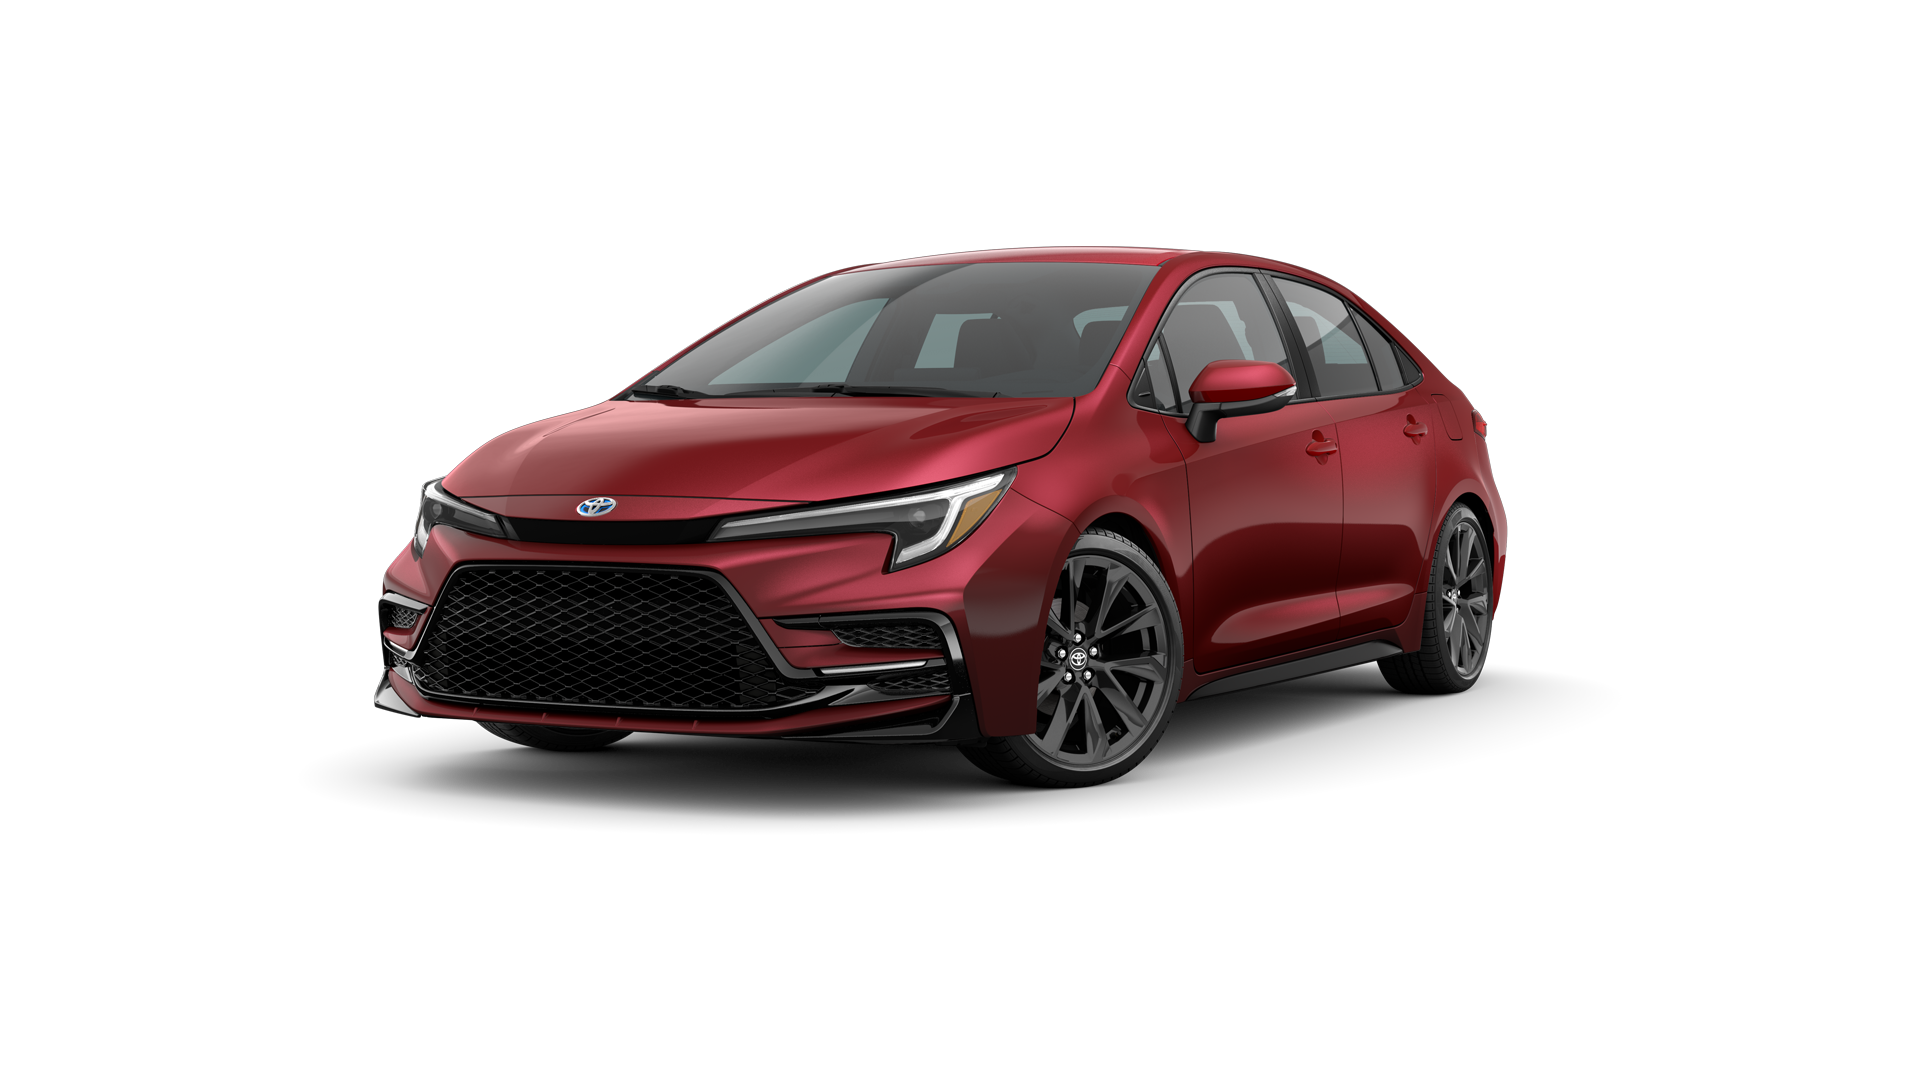 https://www.toyotahawaii.com/on/demandware.static/-/Sites-Servco_master/default/dw2e19d3a5/images/model/Corolla/360/ruby-flare-pearl/23_Corolla-Hybrid_SE_RubyFlarePearl_1.png